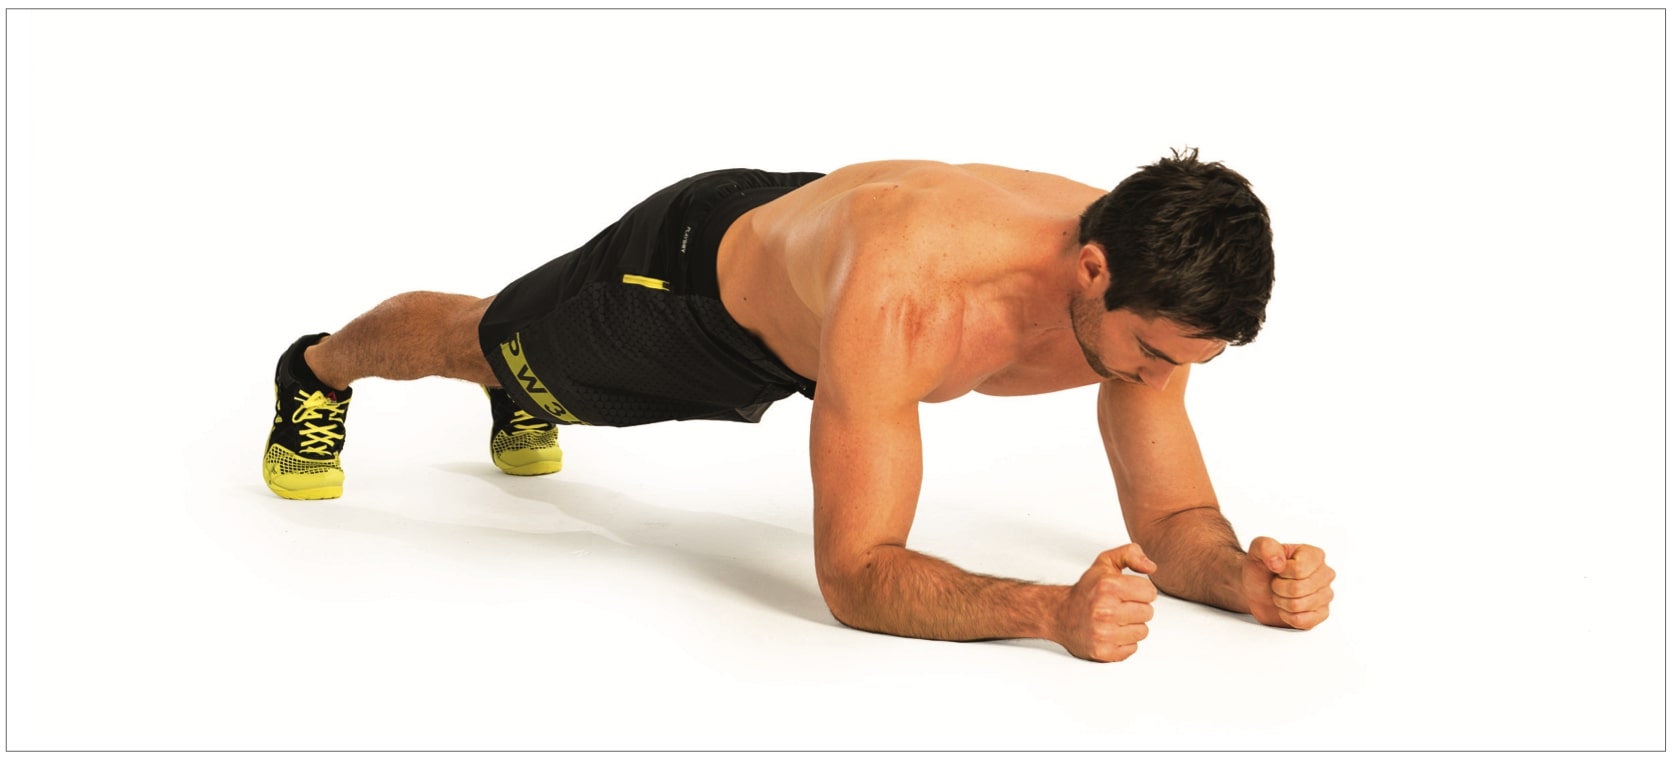 Leg And Ab Workout: Burn Fat & Build Muscle At Home | Men's Fitness UK